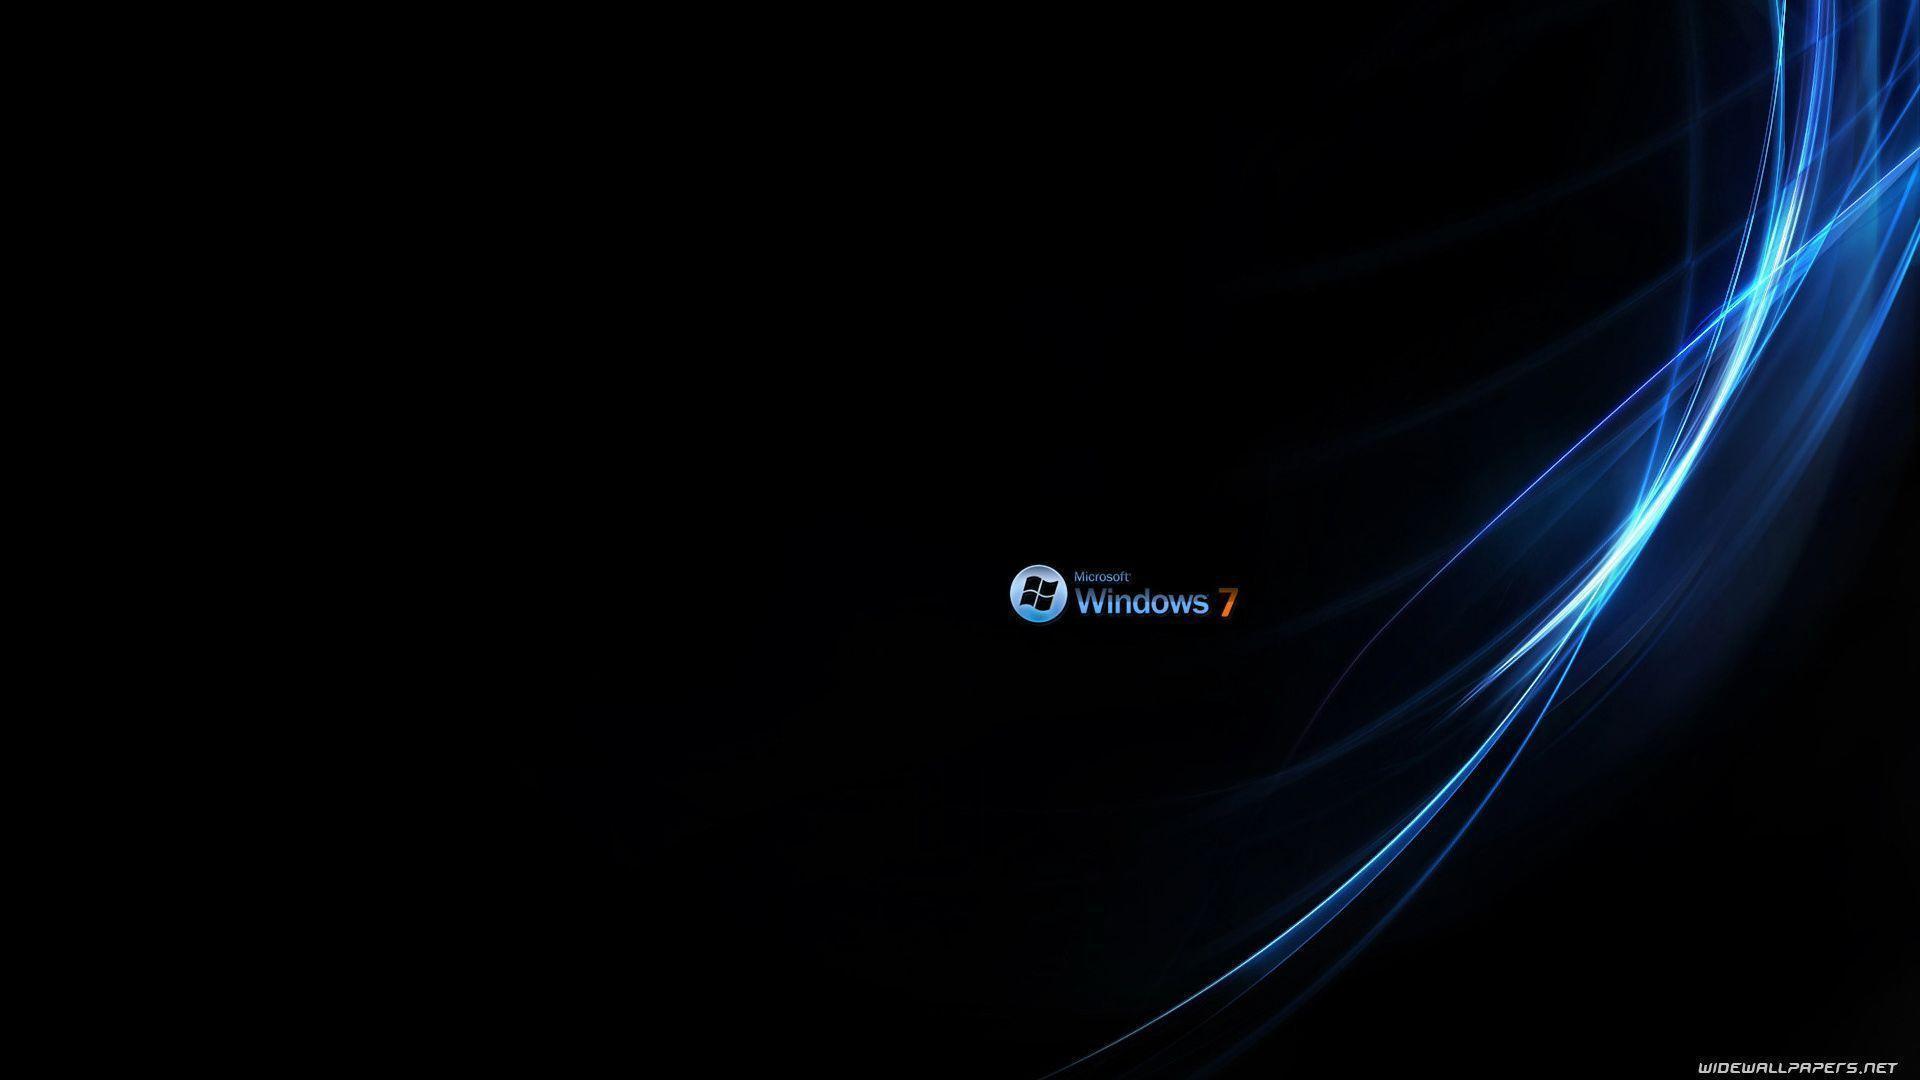 Wallpaper For > Windows 7 Background 1920x1080